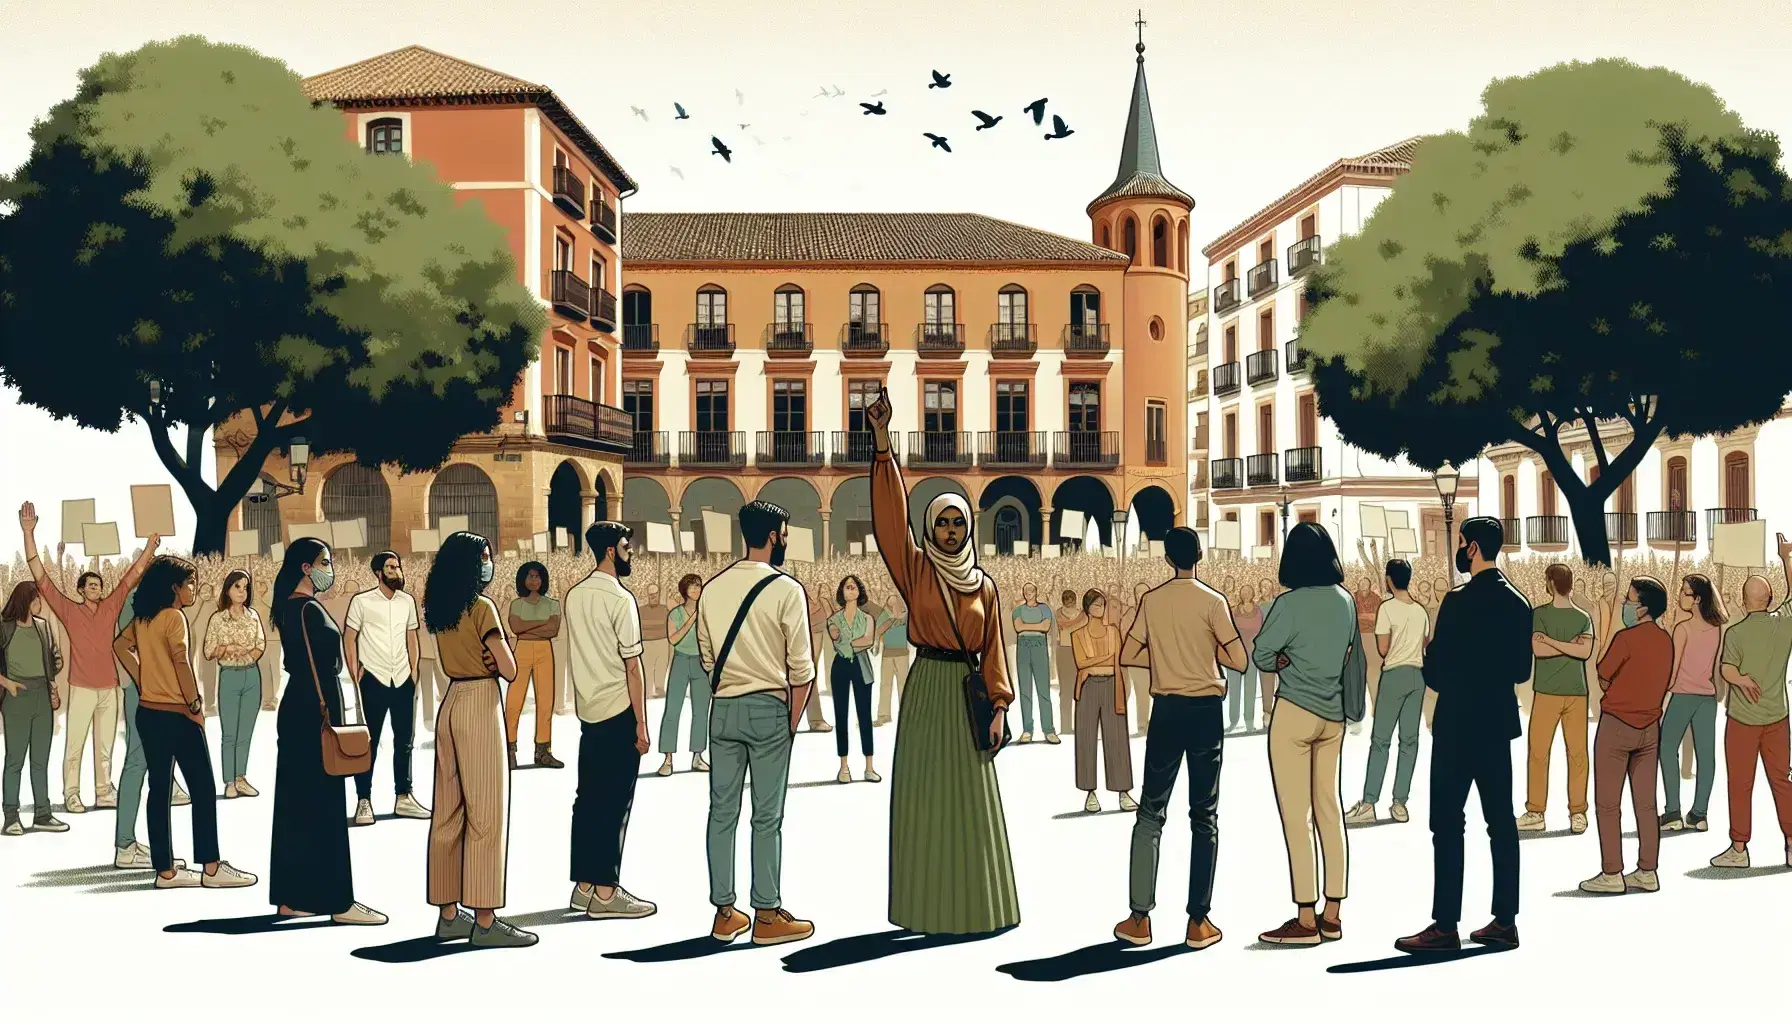 Peaceful multiethnic demonstration in a Spanish city square with a Middle-Eastern woman leading, surrounded by diverse attendees under a clear blue sky.